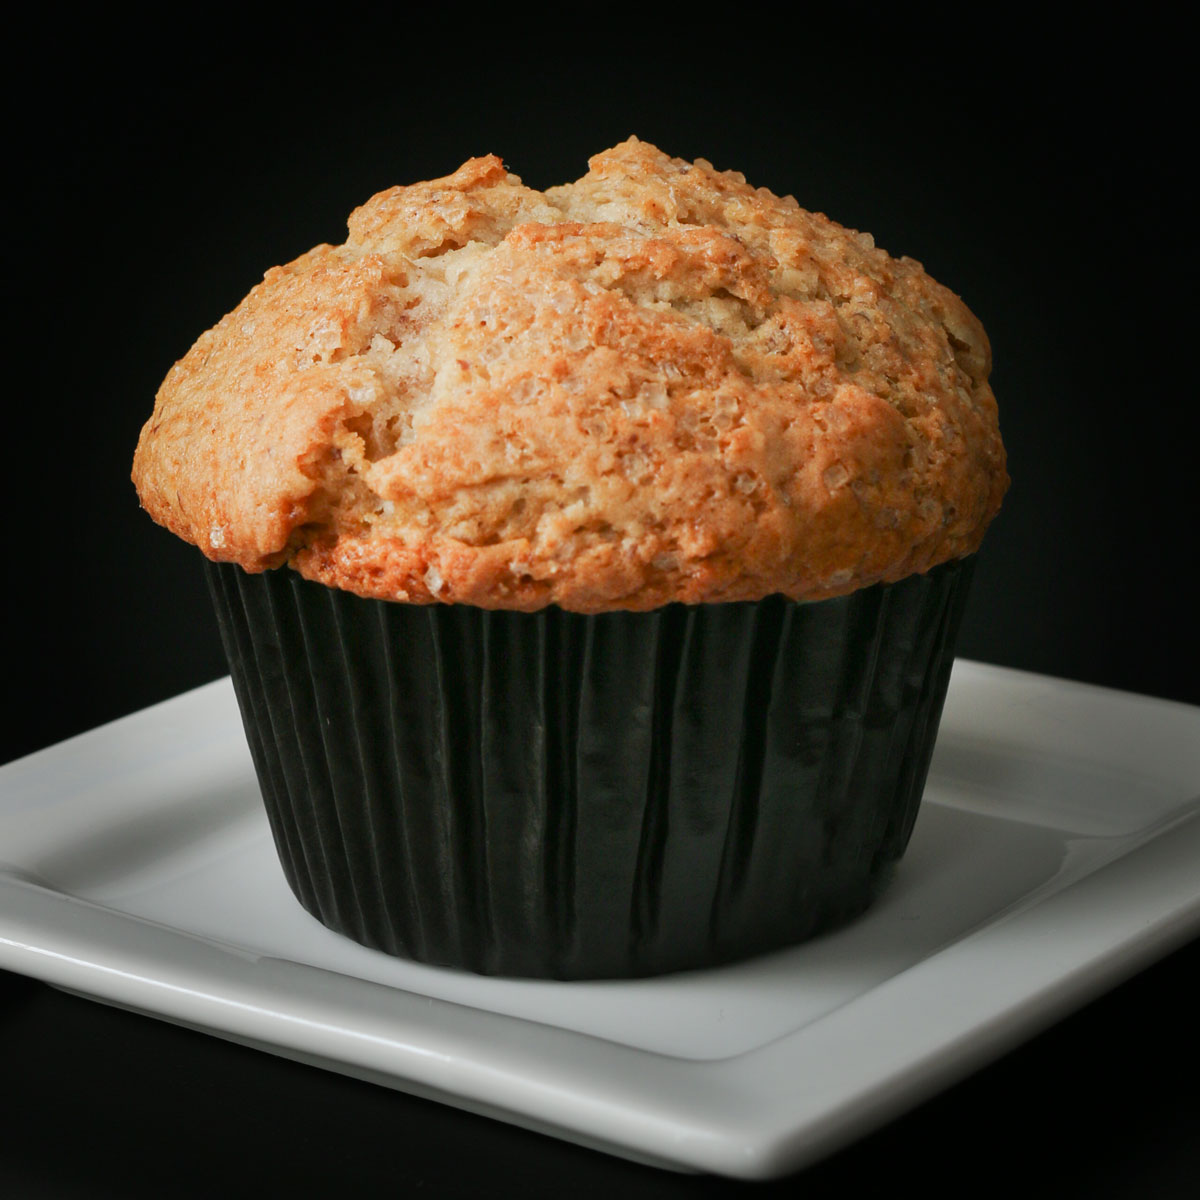 vegan muffin in black muffin paper on white square plate on black table.